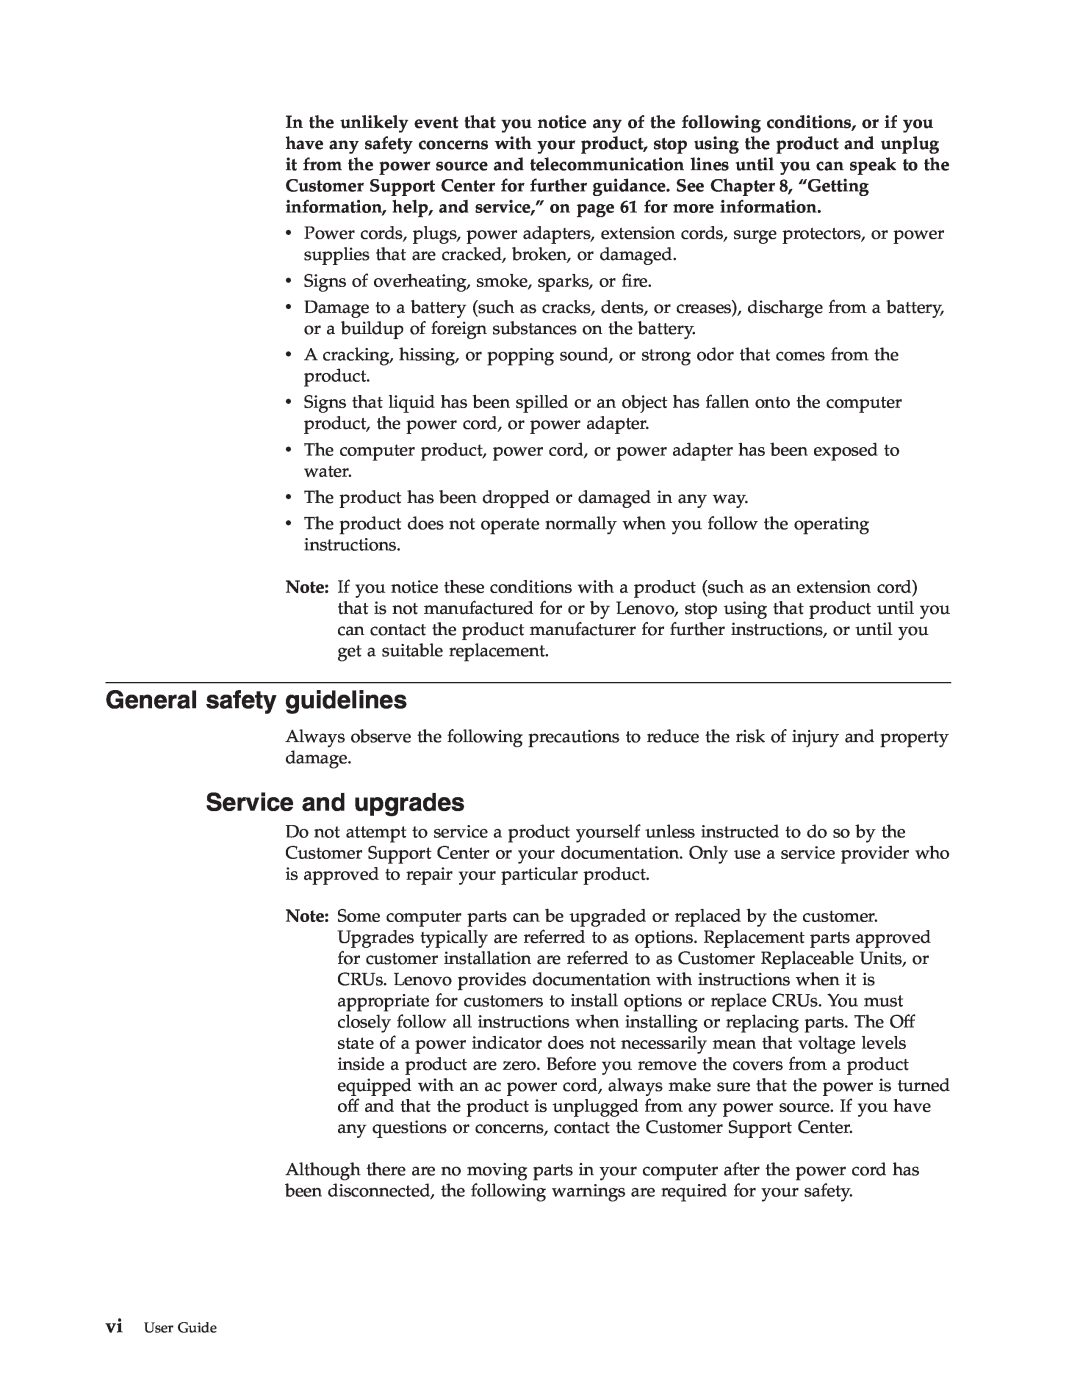 Lenovo 3000 J Series manual General safety guidelines, Service and upgrades 